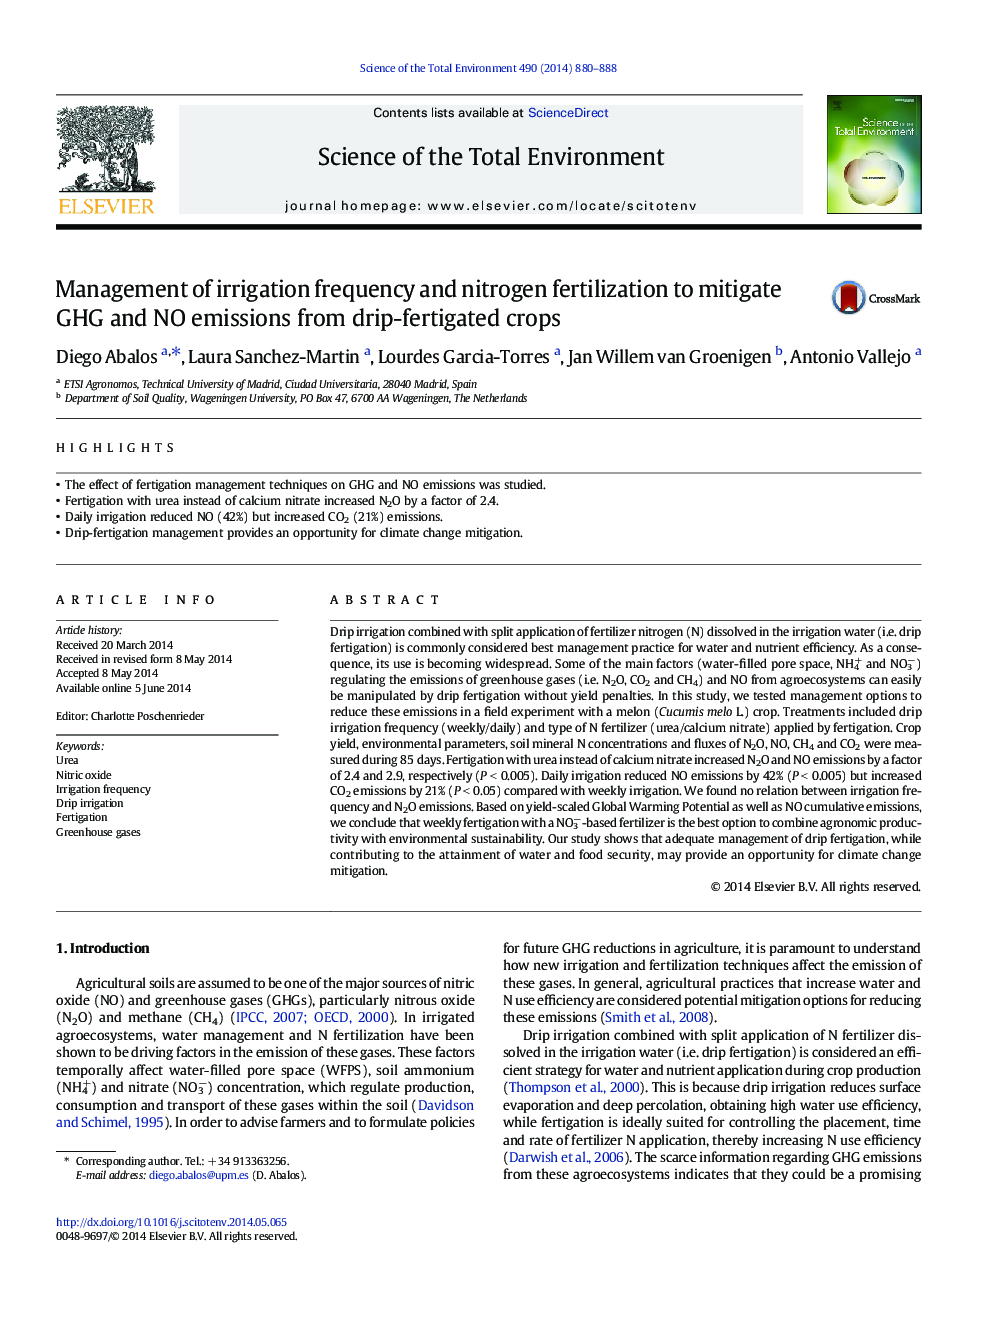 Management of irrigation frequency and nitrogen fertilization to mitigate GHG and NO emissions from drip-fertigated crops